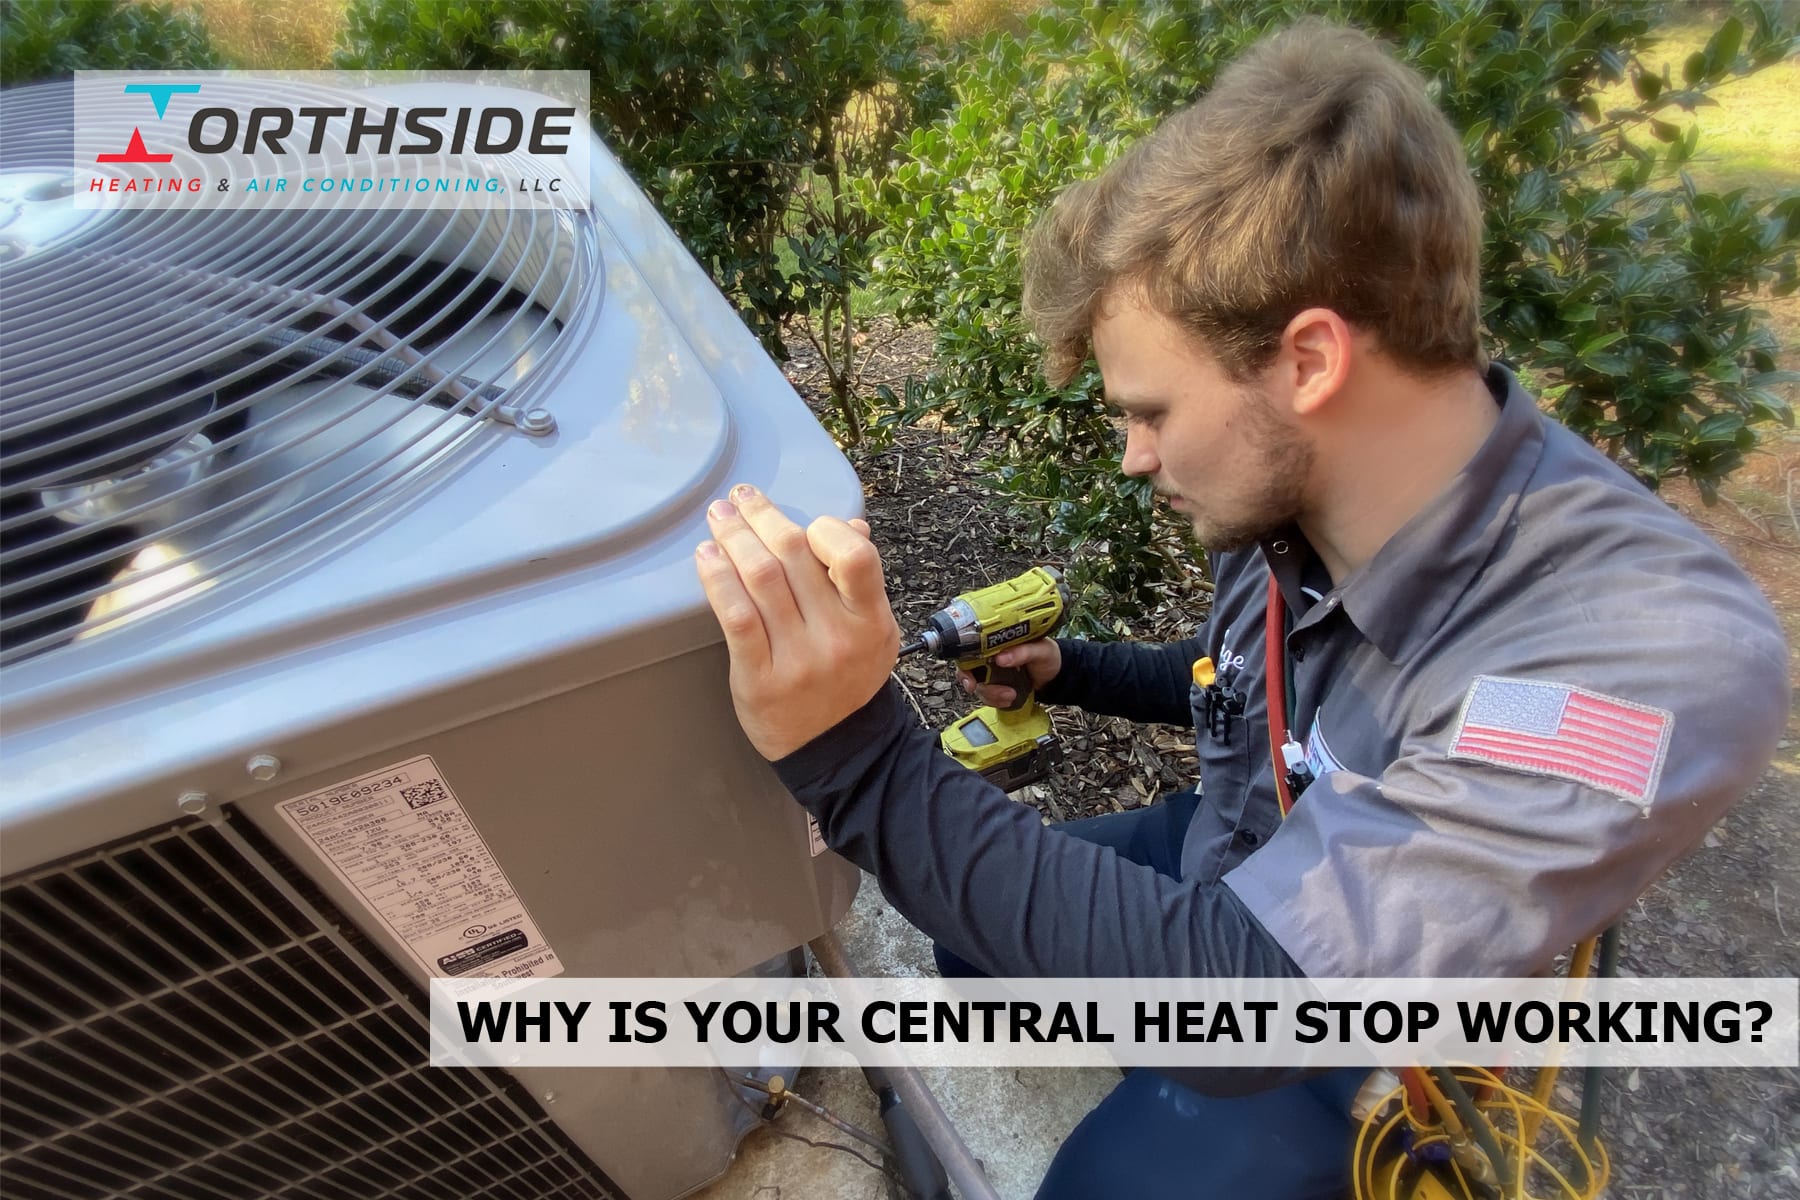 WHY IS YOUR CENTRAL HEAT STOP WORKING?